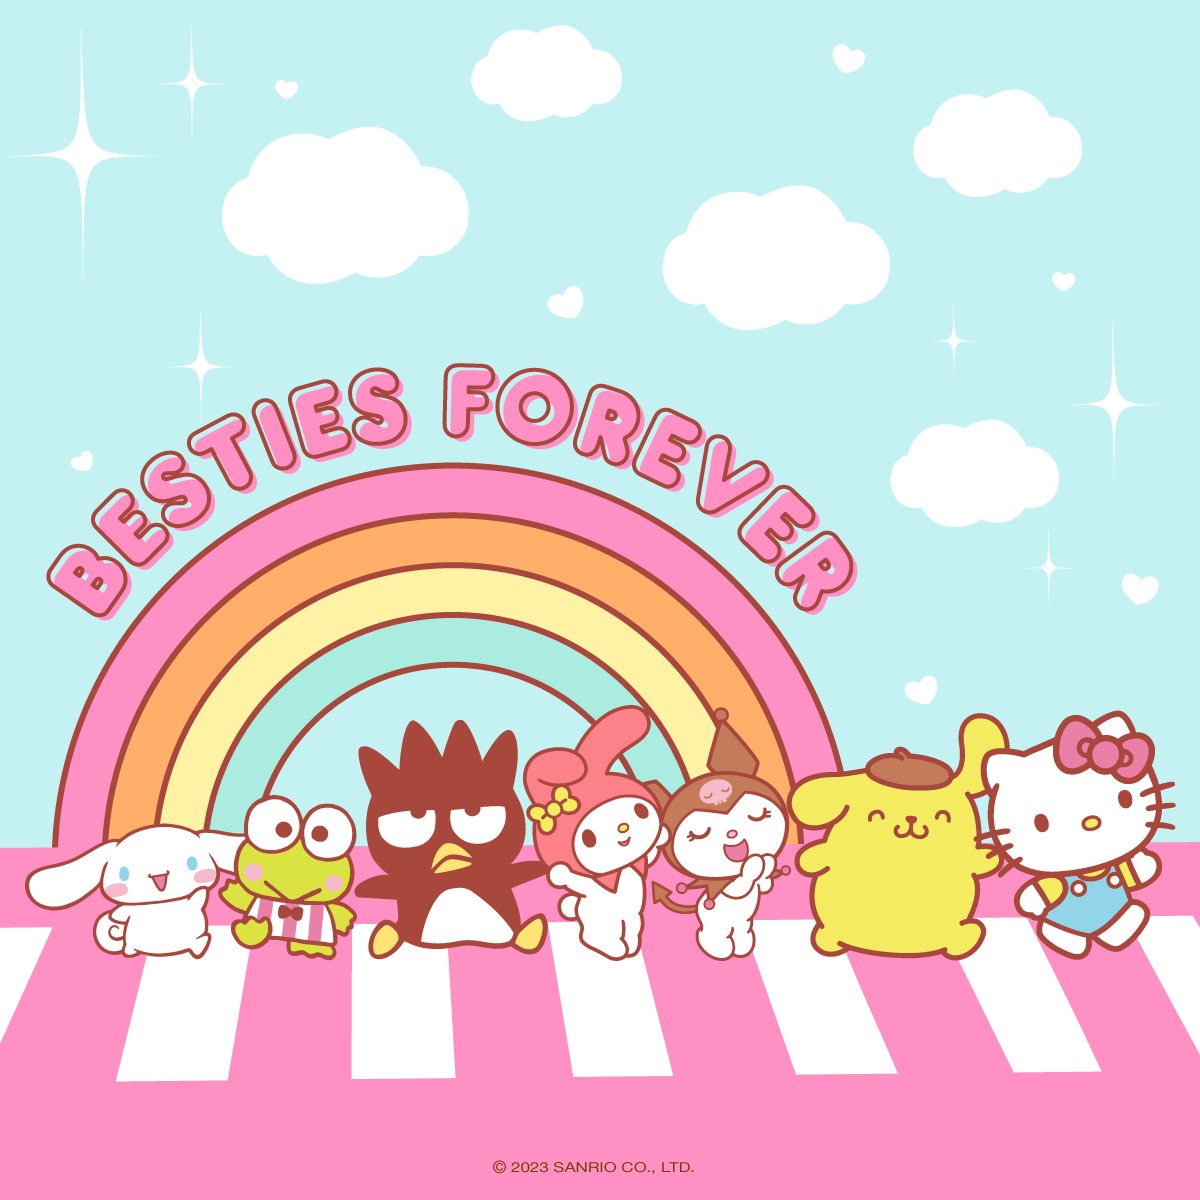 Besties forever 🌈💖 Tag your BFF and tell us why you love them! #nationalbestfriendsday